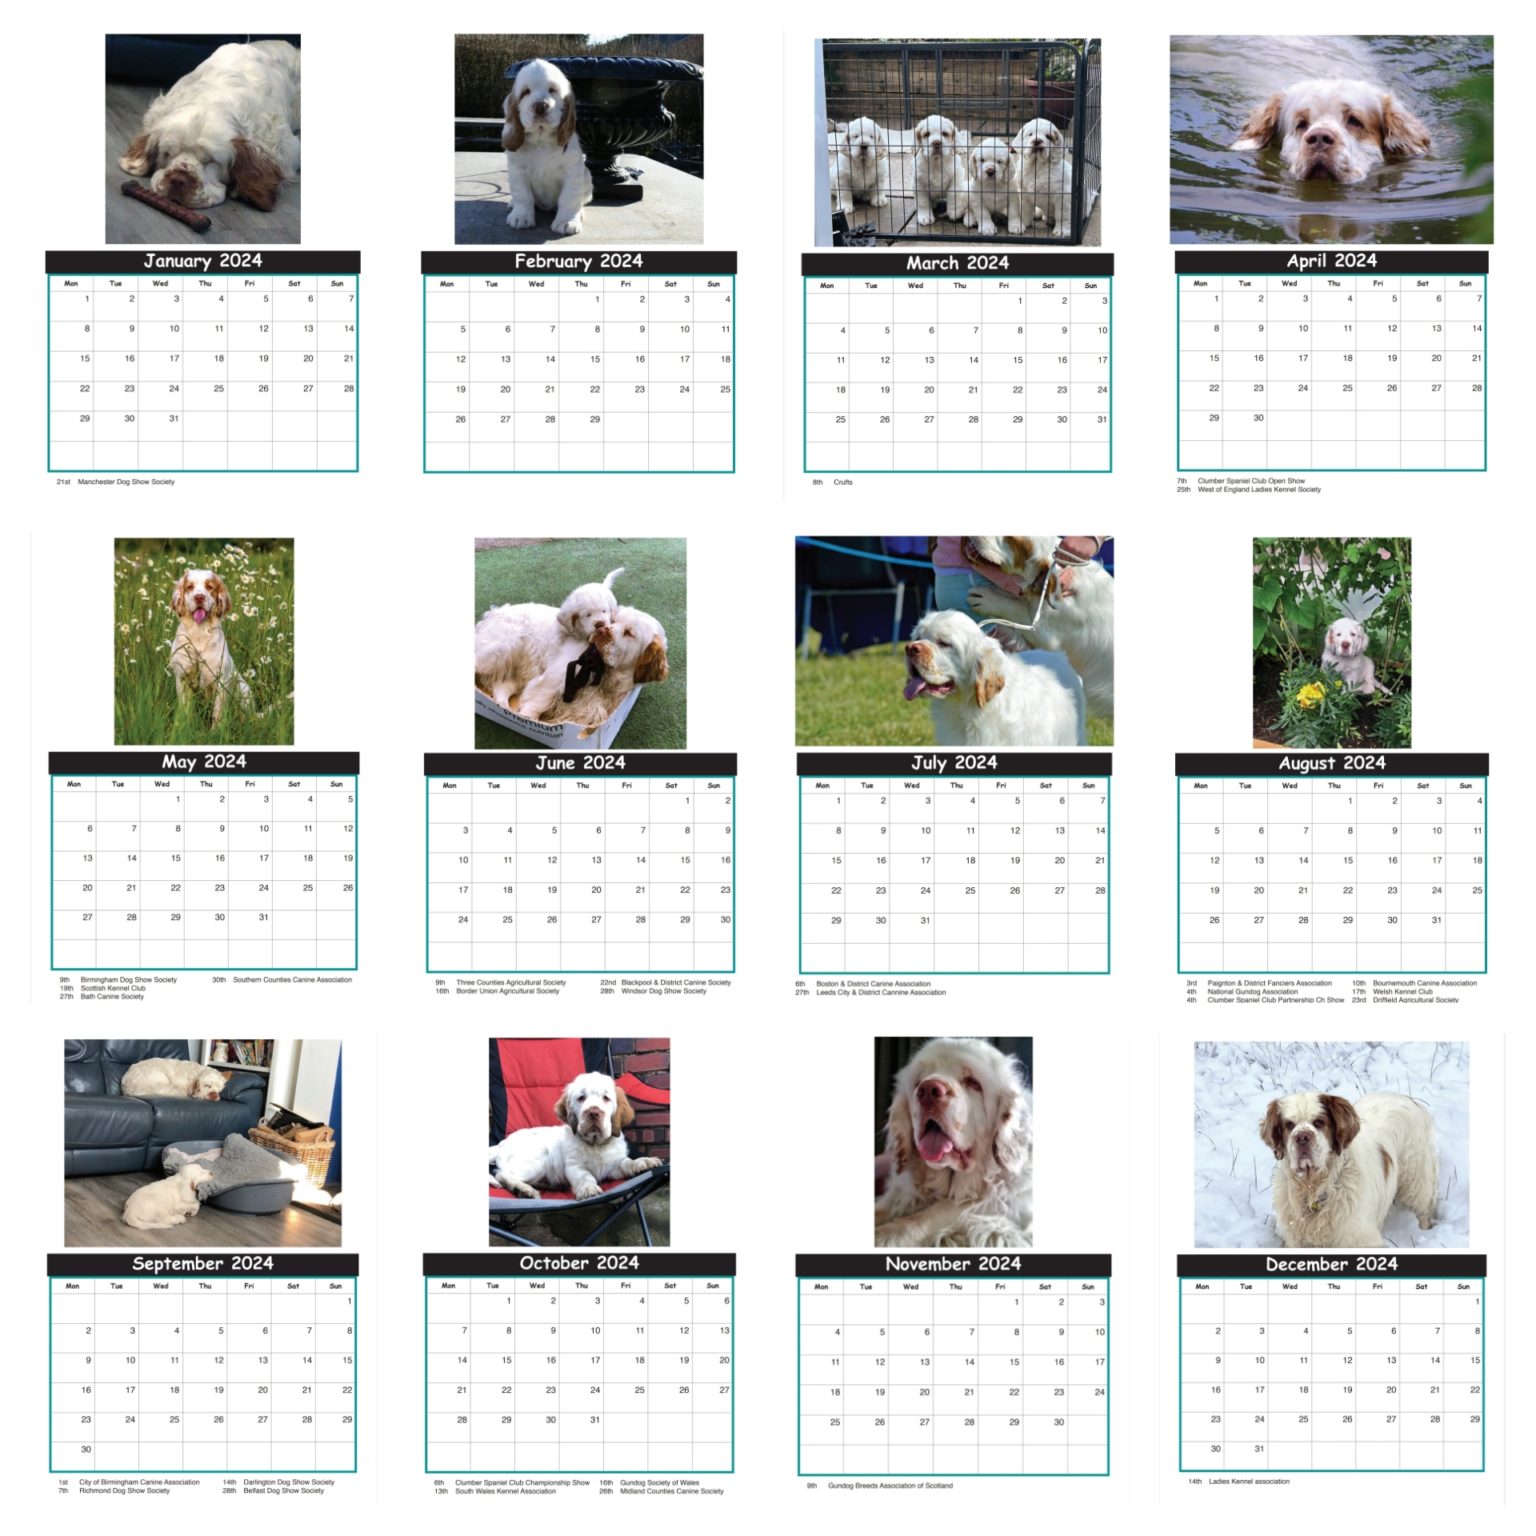 Clumber Spaniel Club – The Club for Everything Clumber!